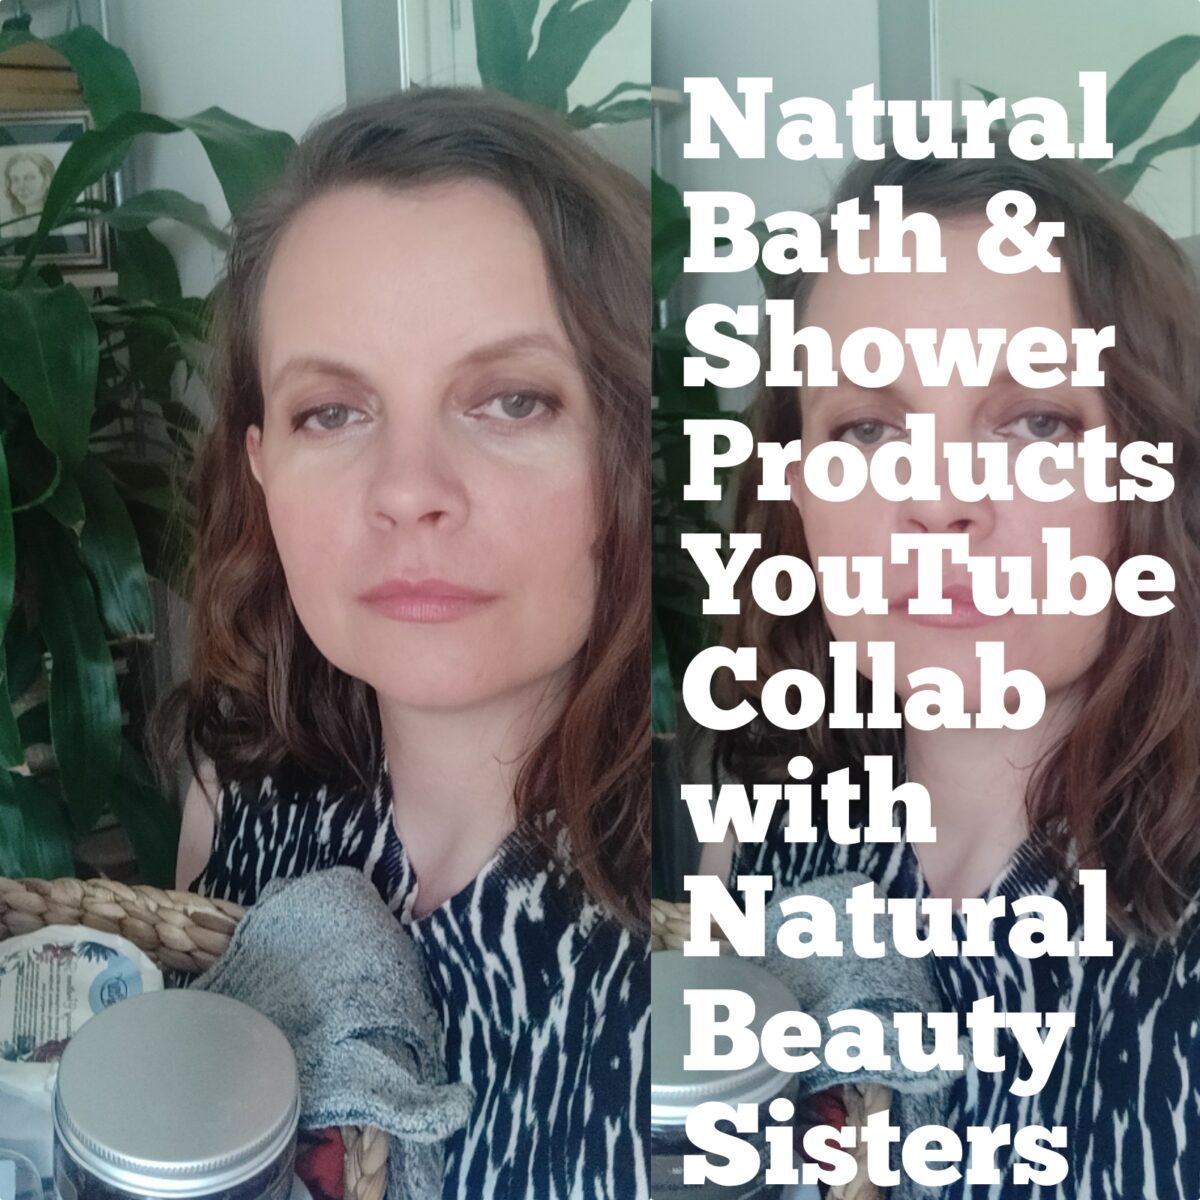 My Natural Bath & Shower Products – YouTube Collaboration